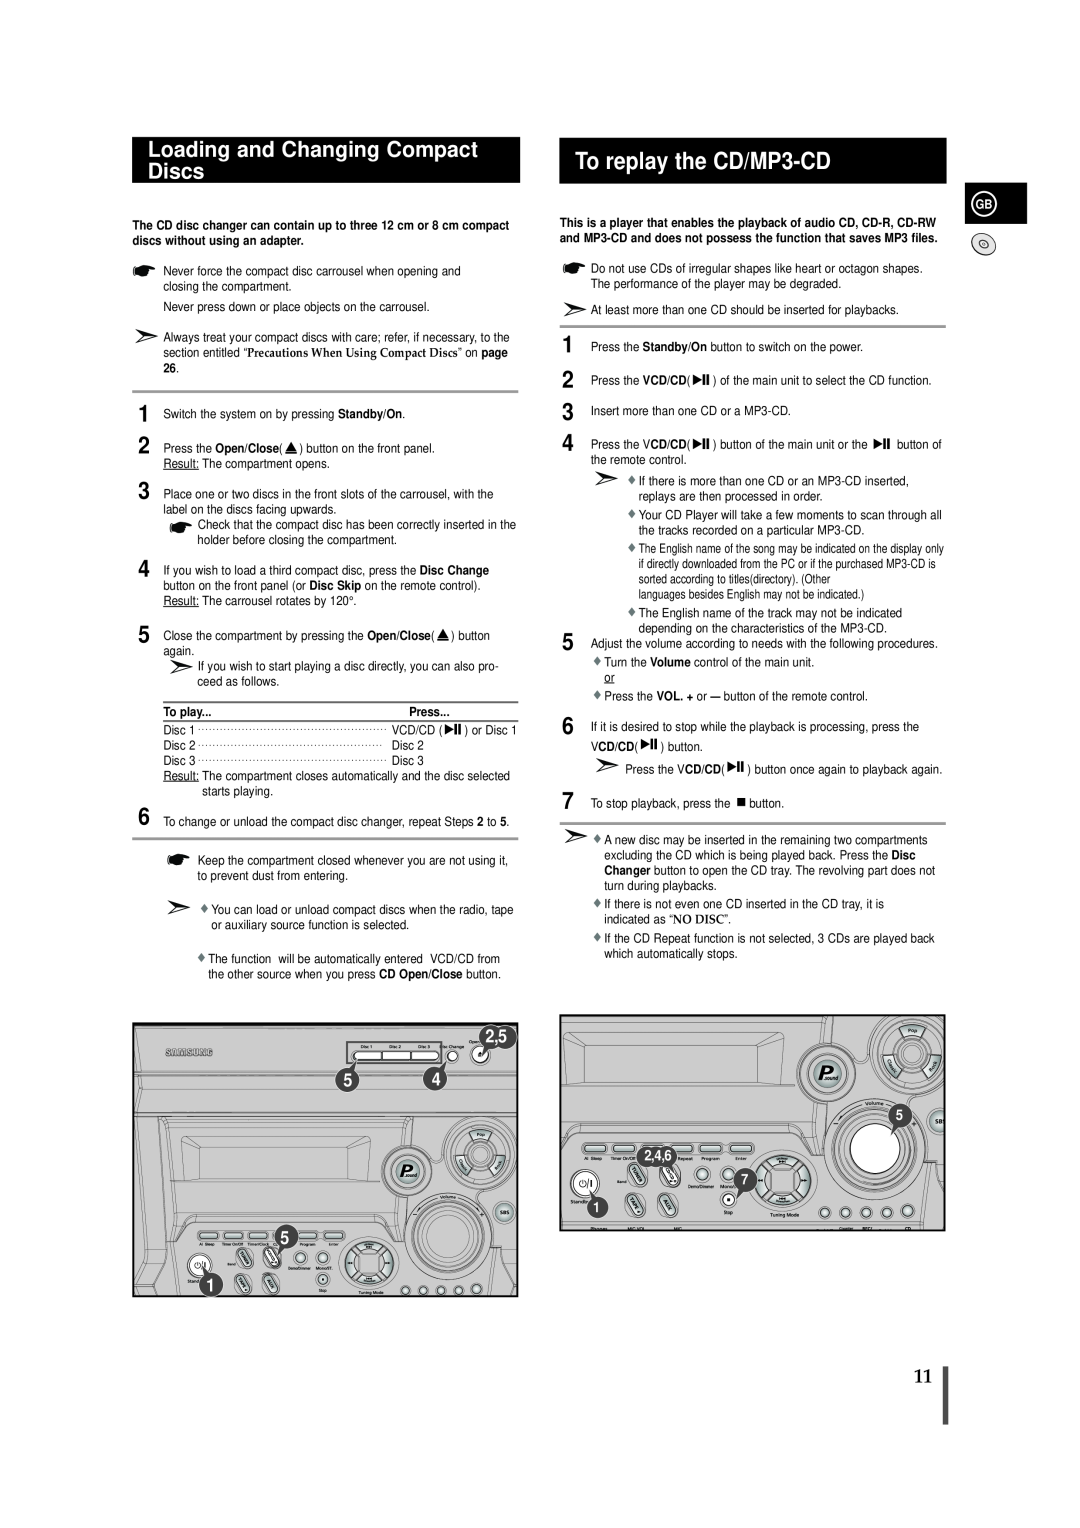 Samsung MAX-VB450 instruction manual To replay the CD/MP3-CD, Loading and Changing Compact Discs, 2,4,6 